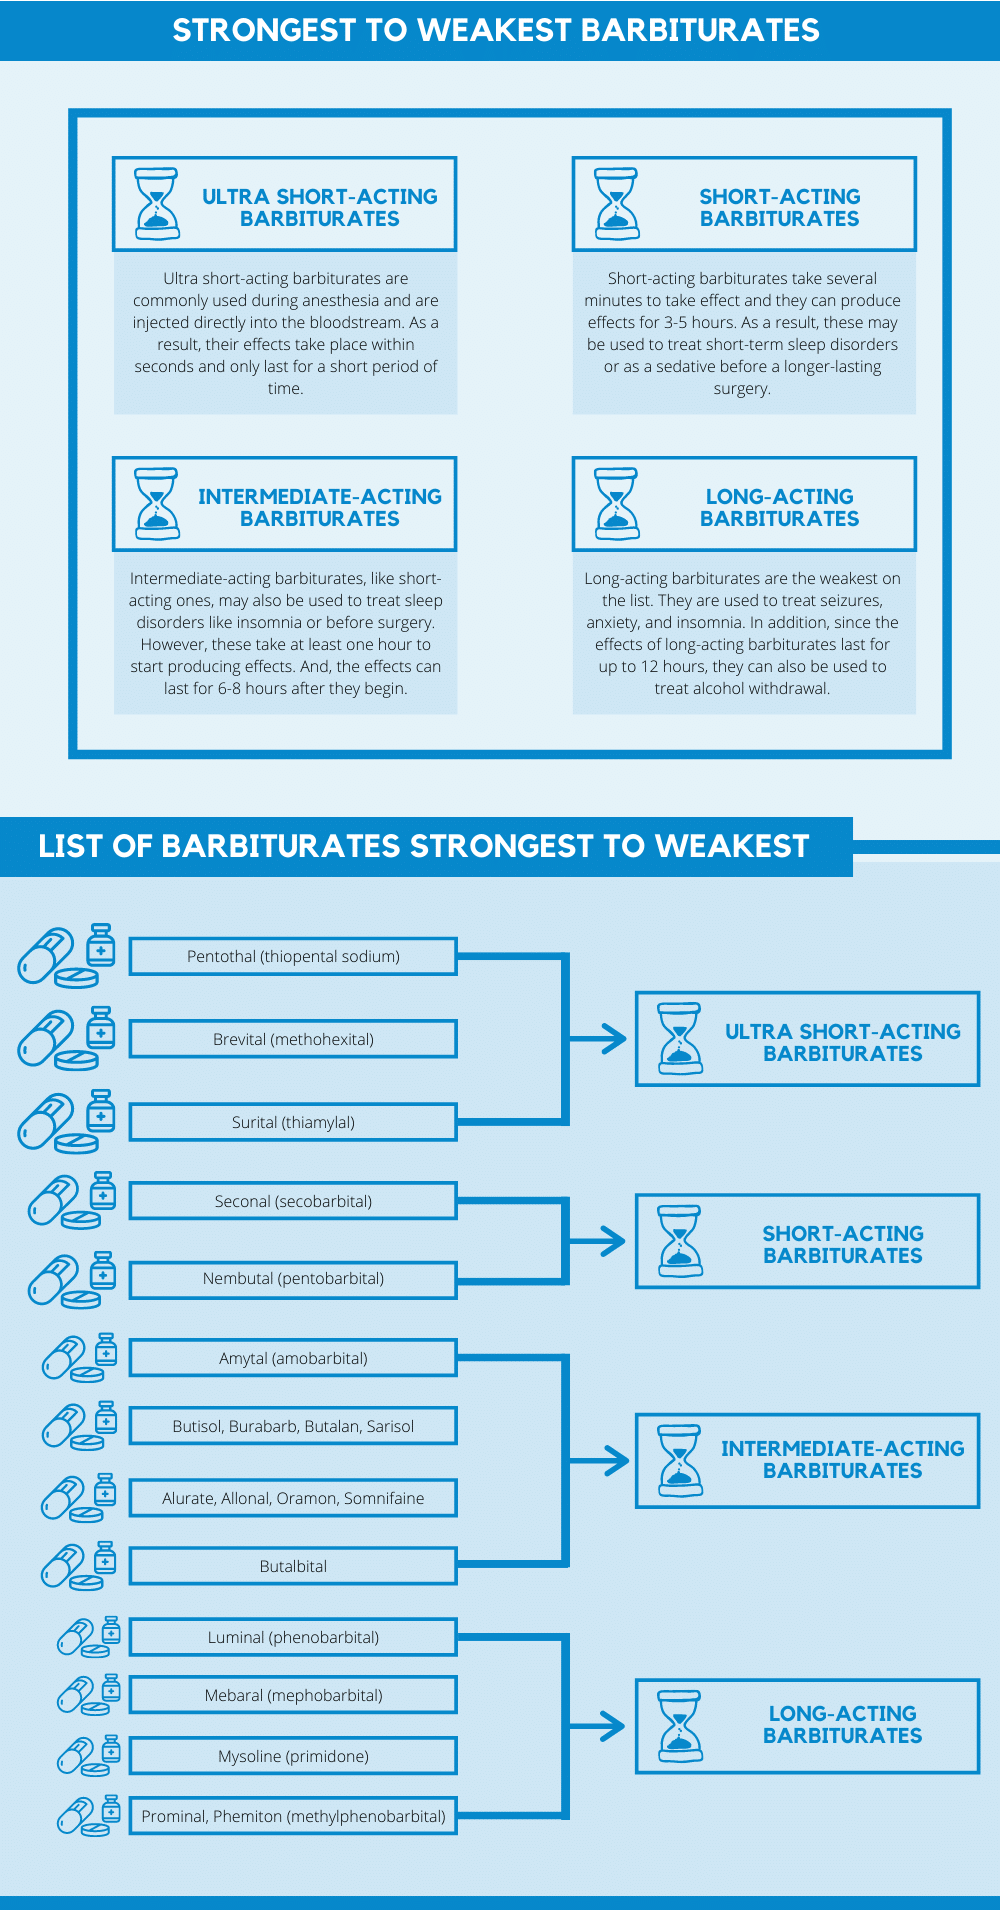 List of strongest to weakest barbiturates